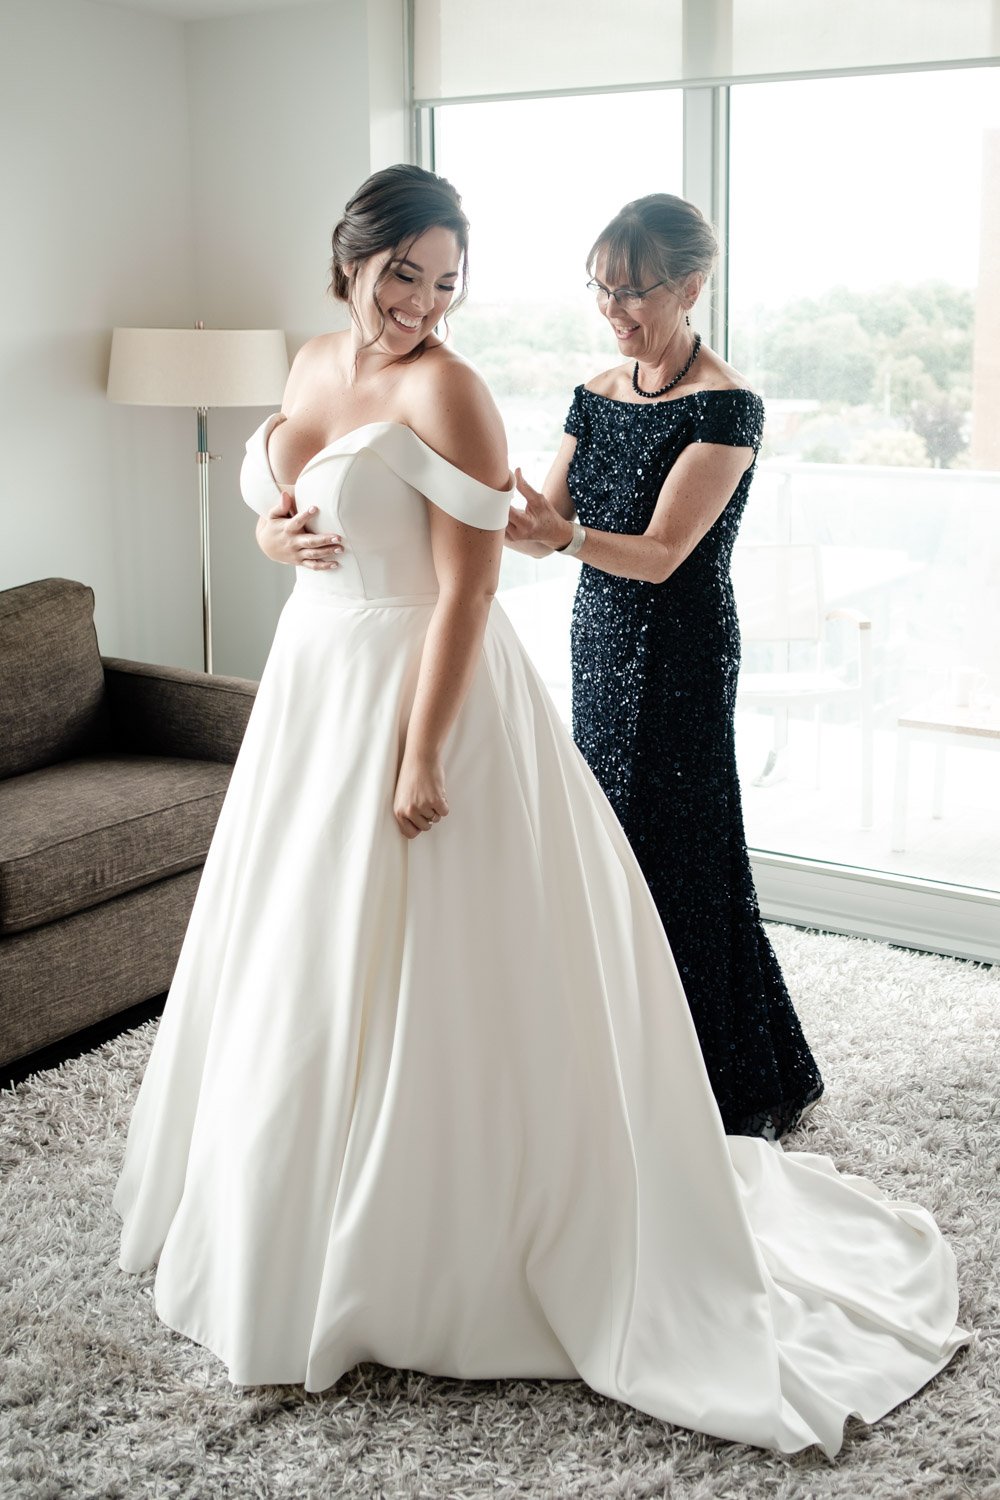 photo of a mother helping her daughter put on her wedding dress